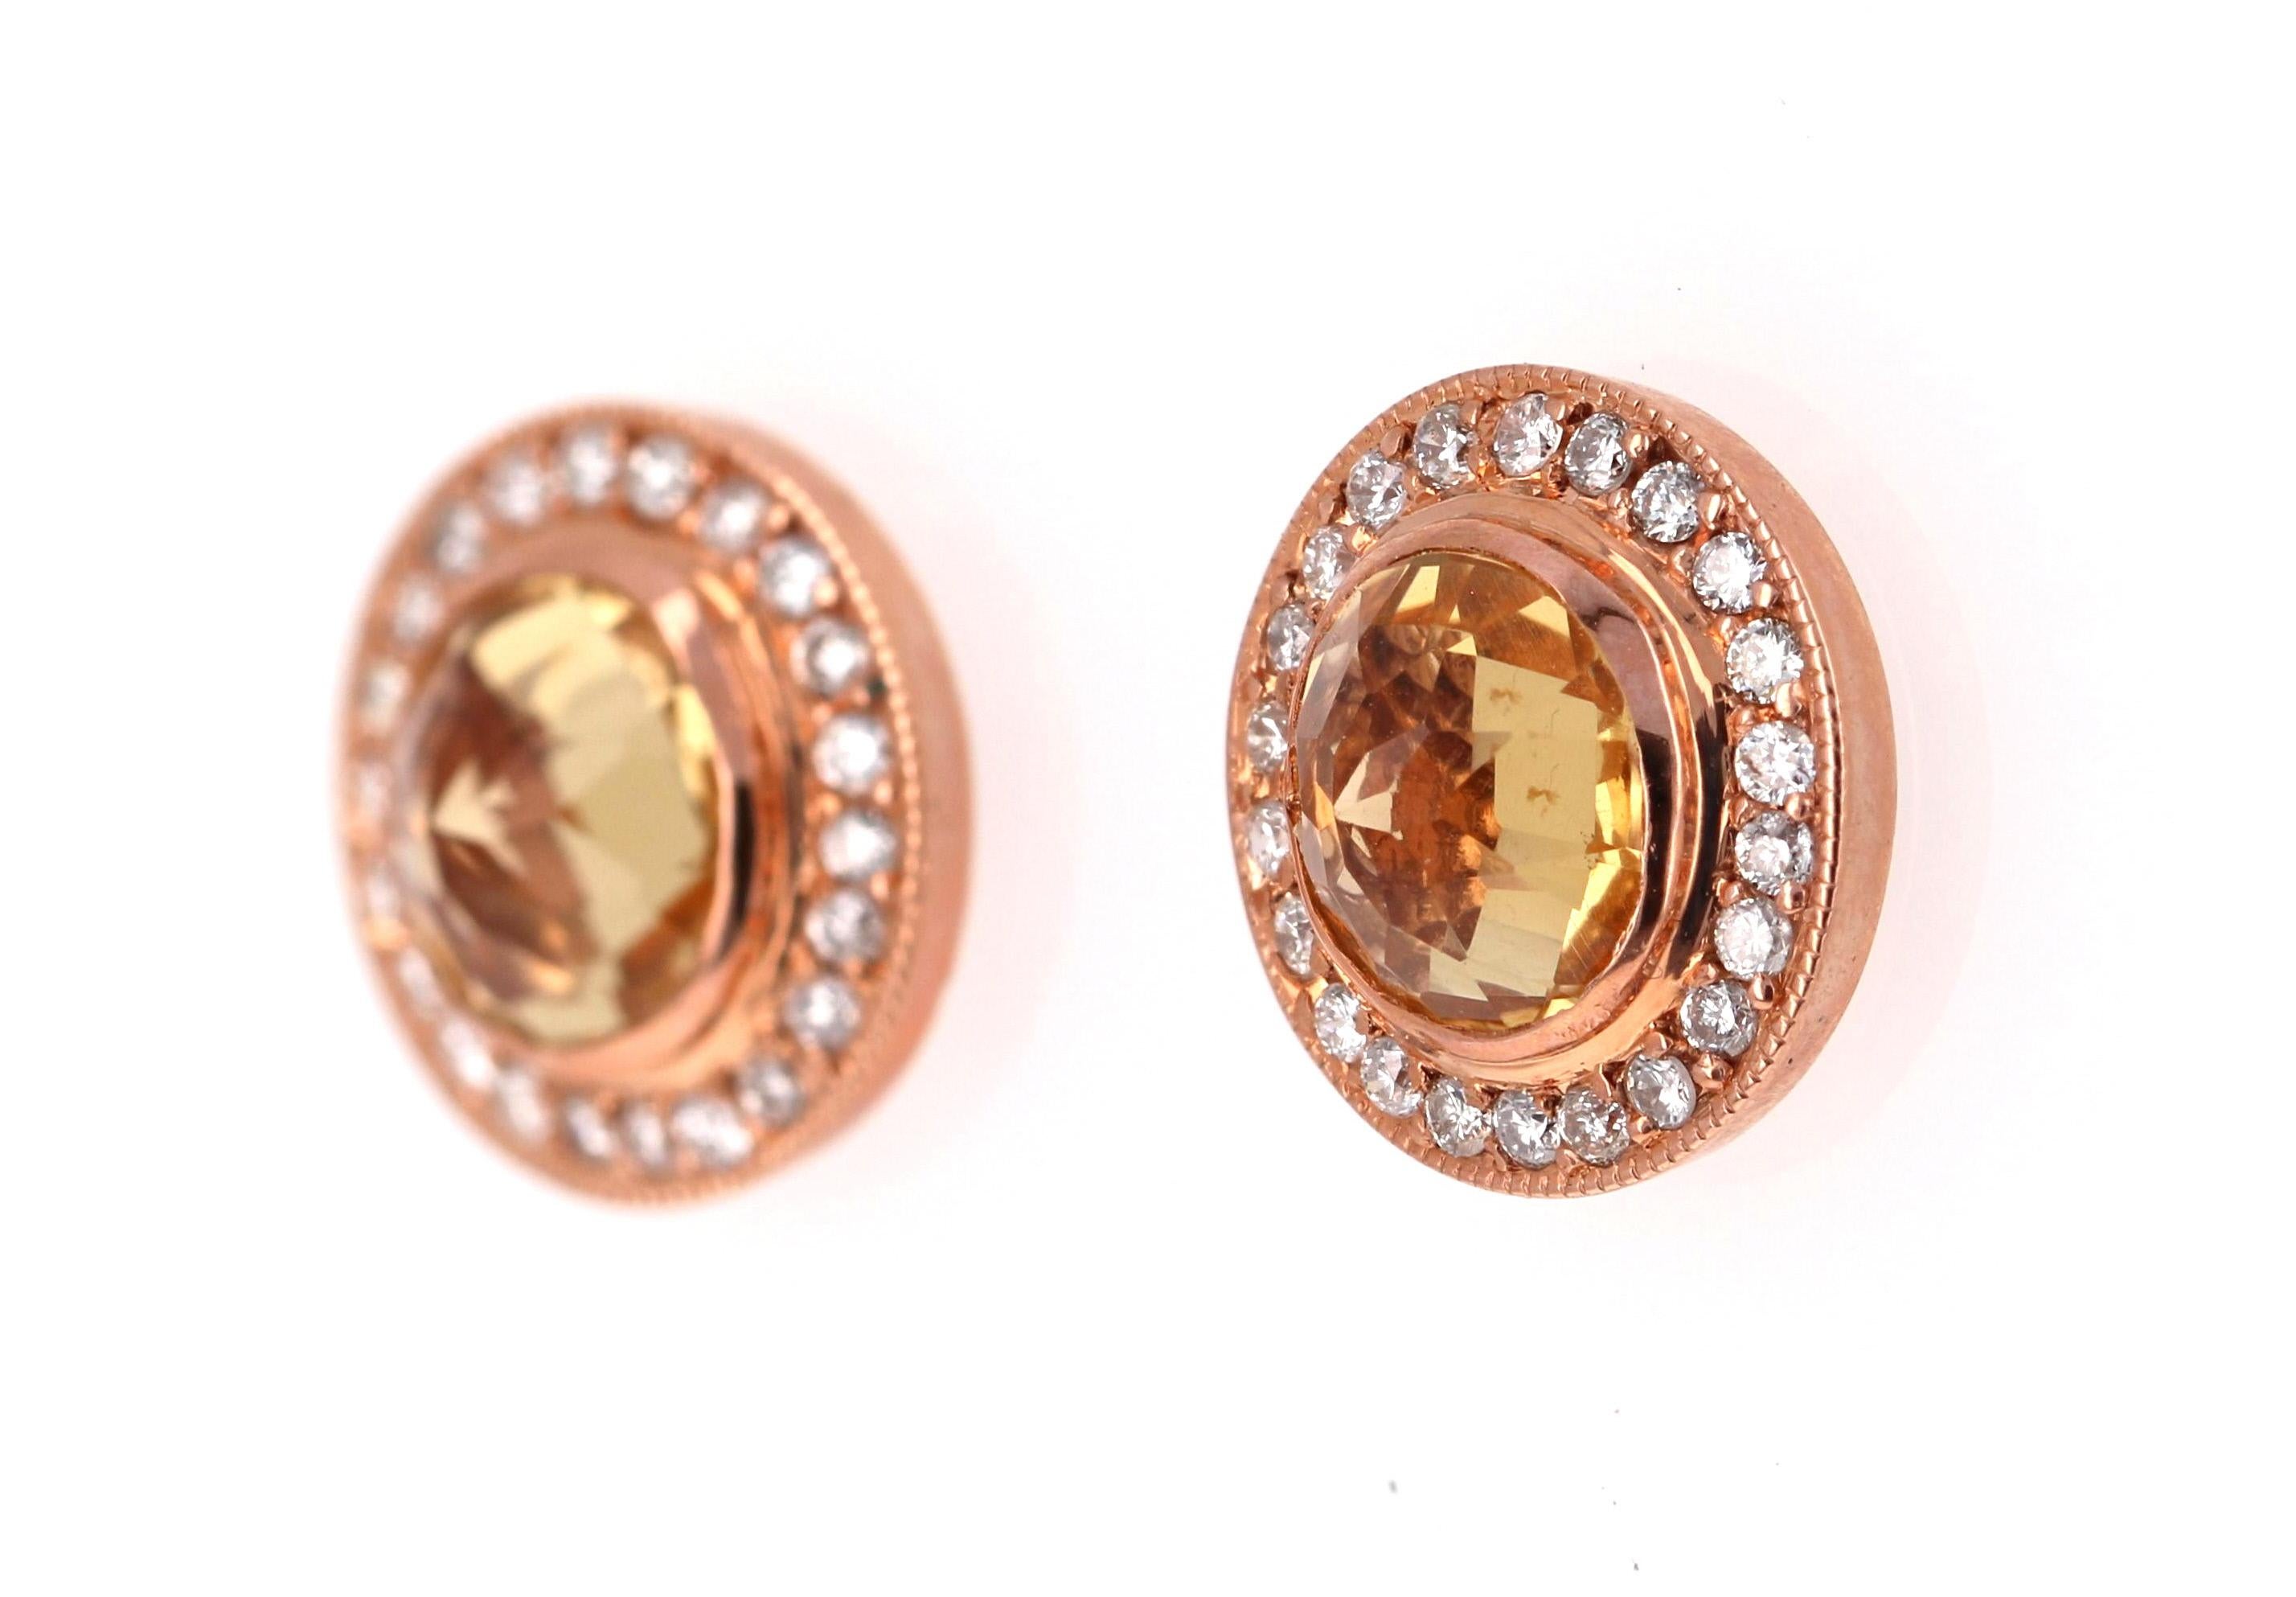 A cute and dainty pair of Citrine Earrings accented with some Diamonds!

These cute studs have 2 Round Cut Citrine stones that weigh 1.58 Carats and are surrounded by a beautiful halo of 44 Round Cut Diamonds that weigh 0.28 Carats. (Clarity: SI,